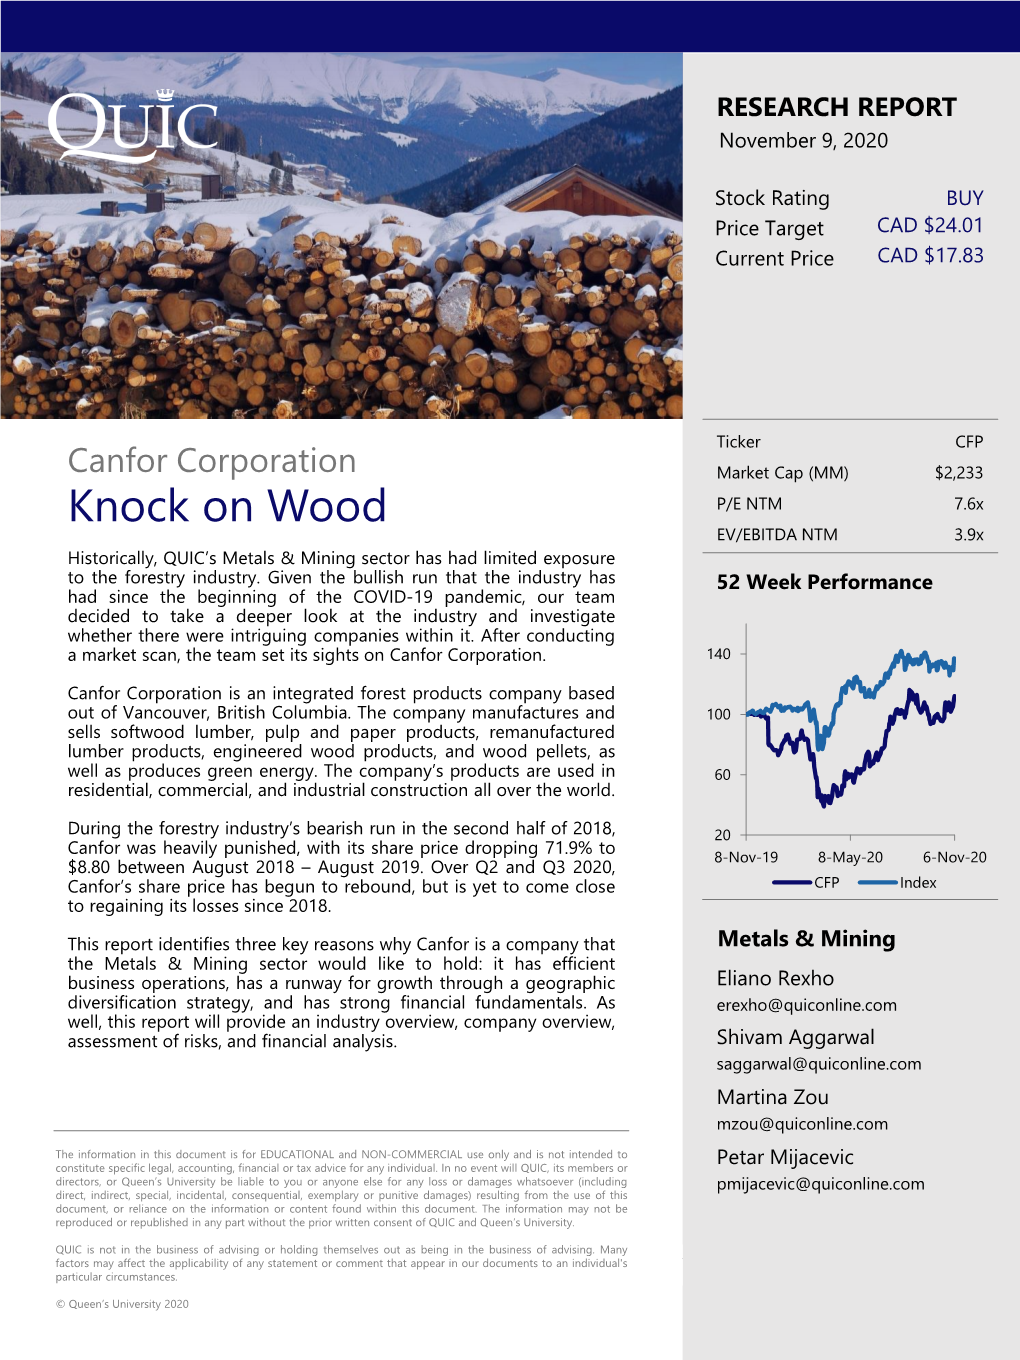 Knock on Wood P/E NTM 7.6X EV/EBITDA NTM 3.9X Historically, QUIC’S Metals & Mining Sector Has Had Limited Exposure to the Forestry Industry